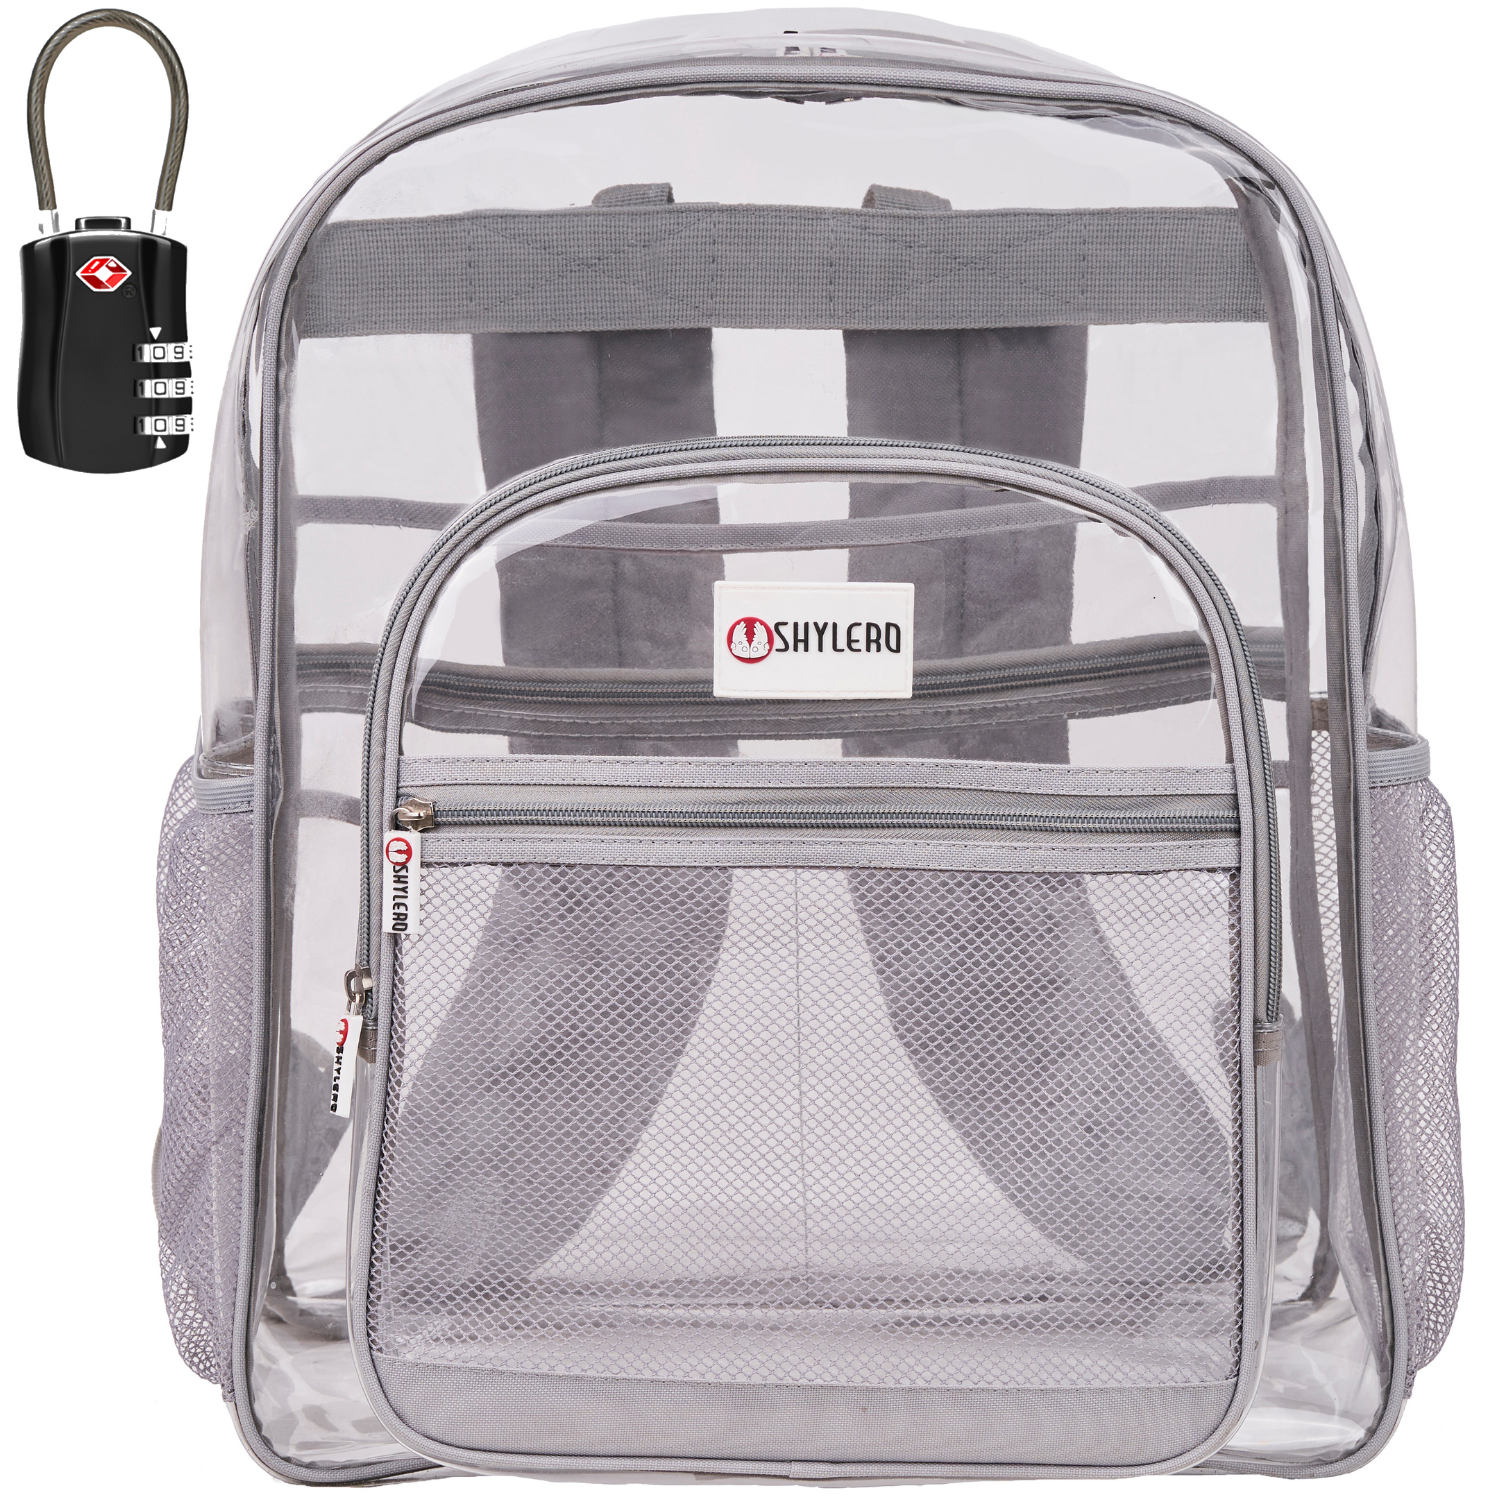 Clear Backpack For Work and School Backpack XL | TSA Lock | H18" x W14" x D8" (45cm x 35cm x 20cm) | 31.5 L | Grey Rhino